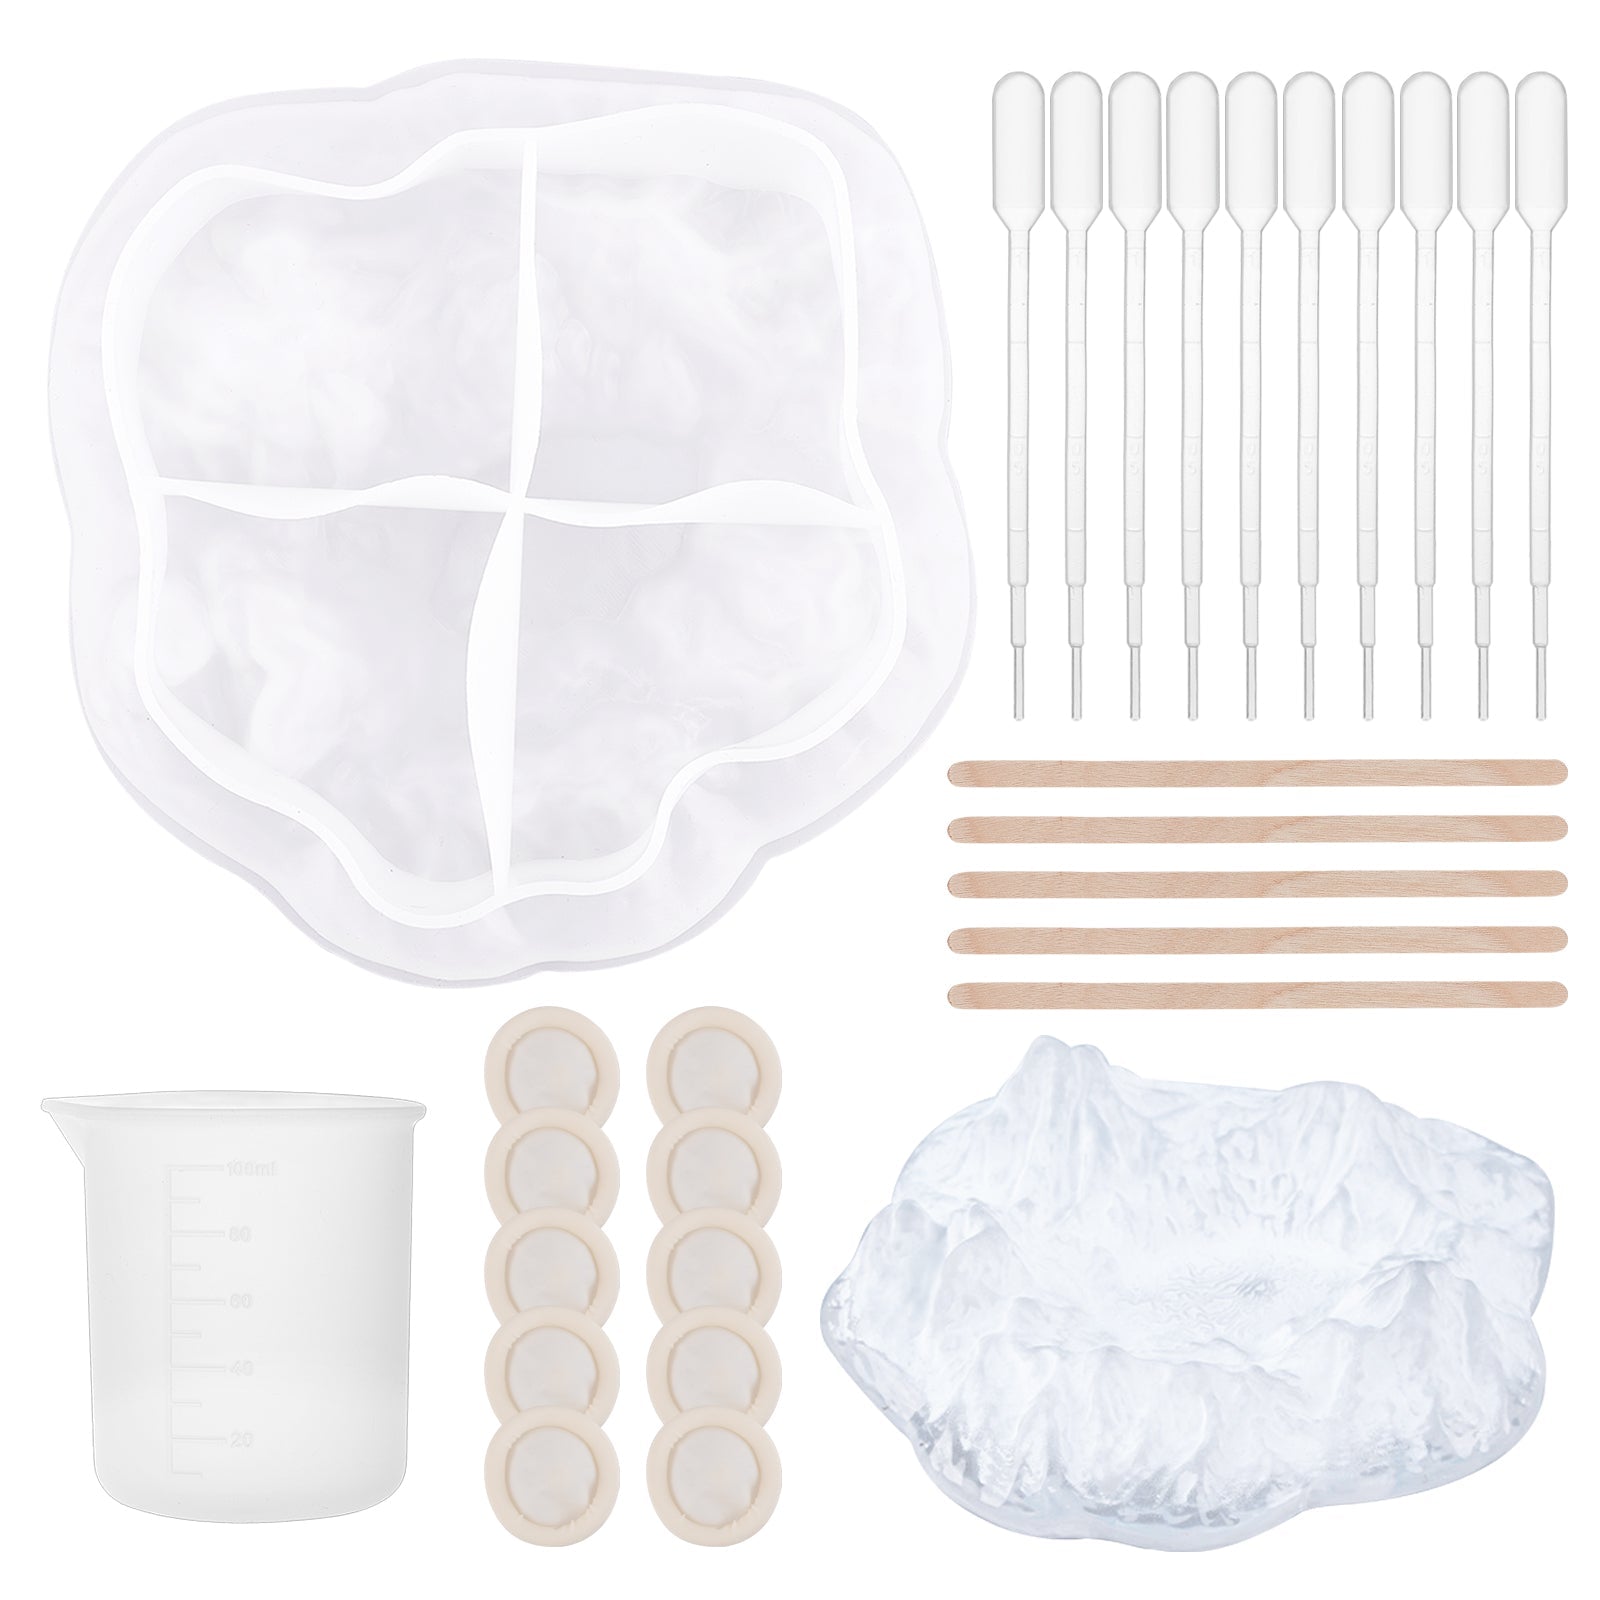 CRASPIRE DIY Ashtray Shape Making Kits, with Silicone Molds, Silicone 100ml  Measuring Cup, Plastic Transfer Pipettes, Birch Wooden Craft Ice Cream  Sticks, Latex Finger Cots, White, 27pcs/set